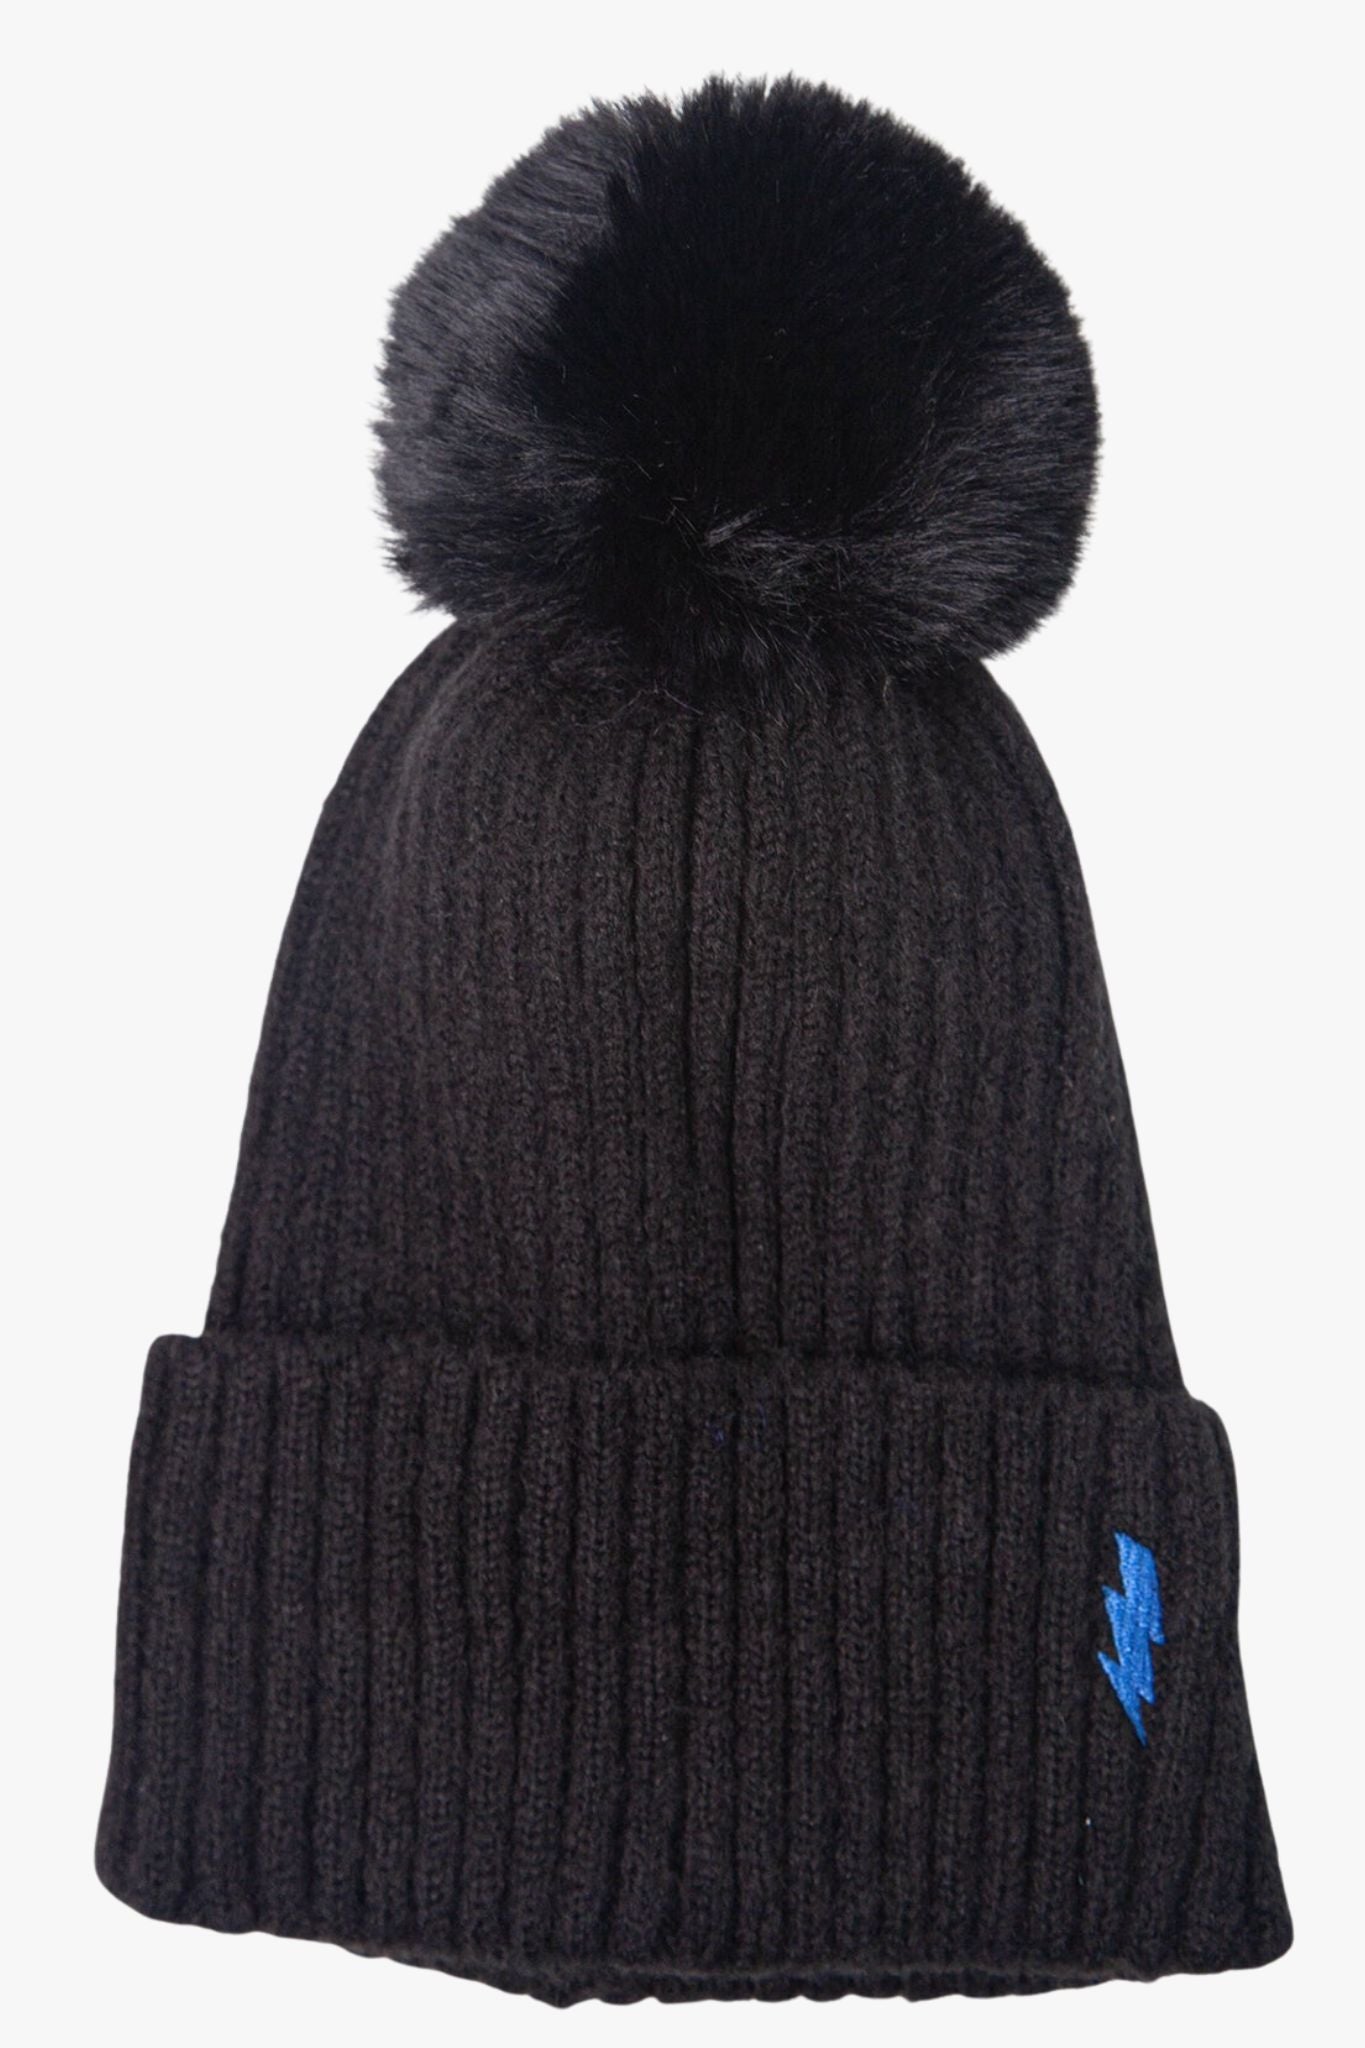 black winter beanie hat with pom pom and blue embroidered lightning bolt